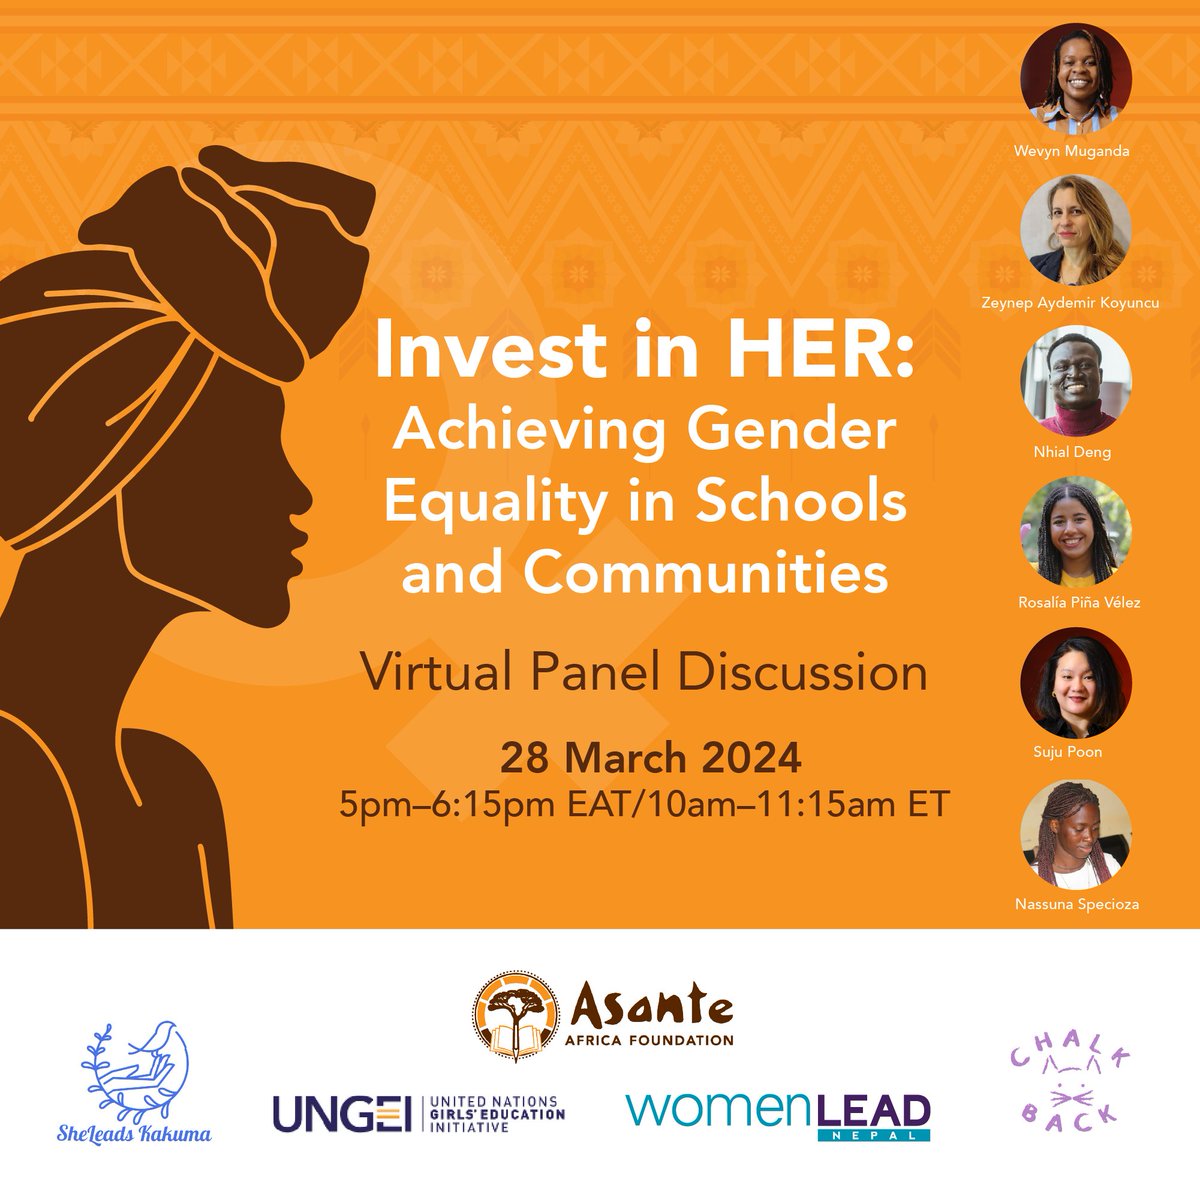 IT'S TODAY! Our virtual panel discussion 'Invest in HER: Achieving Gender Equality in Schools and Communities' is happening today at 5PM EAT/10AM ET/7AM PST. Join the conversation ➡️ asanteafrica.org/panel-discussi… #InvestInHer #AAFempowers